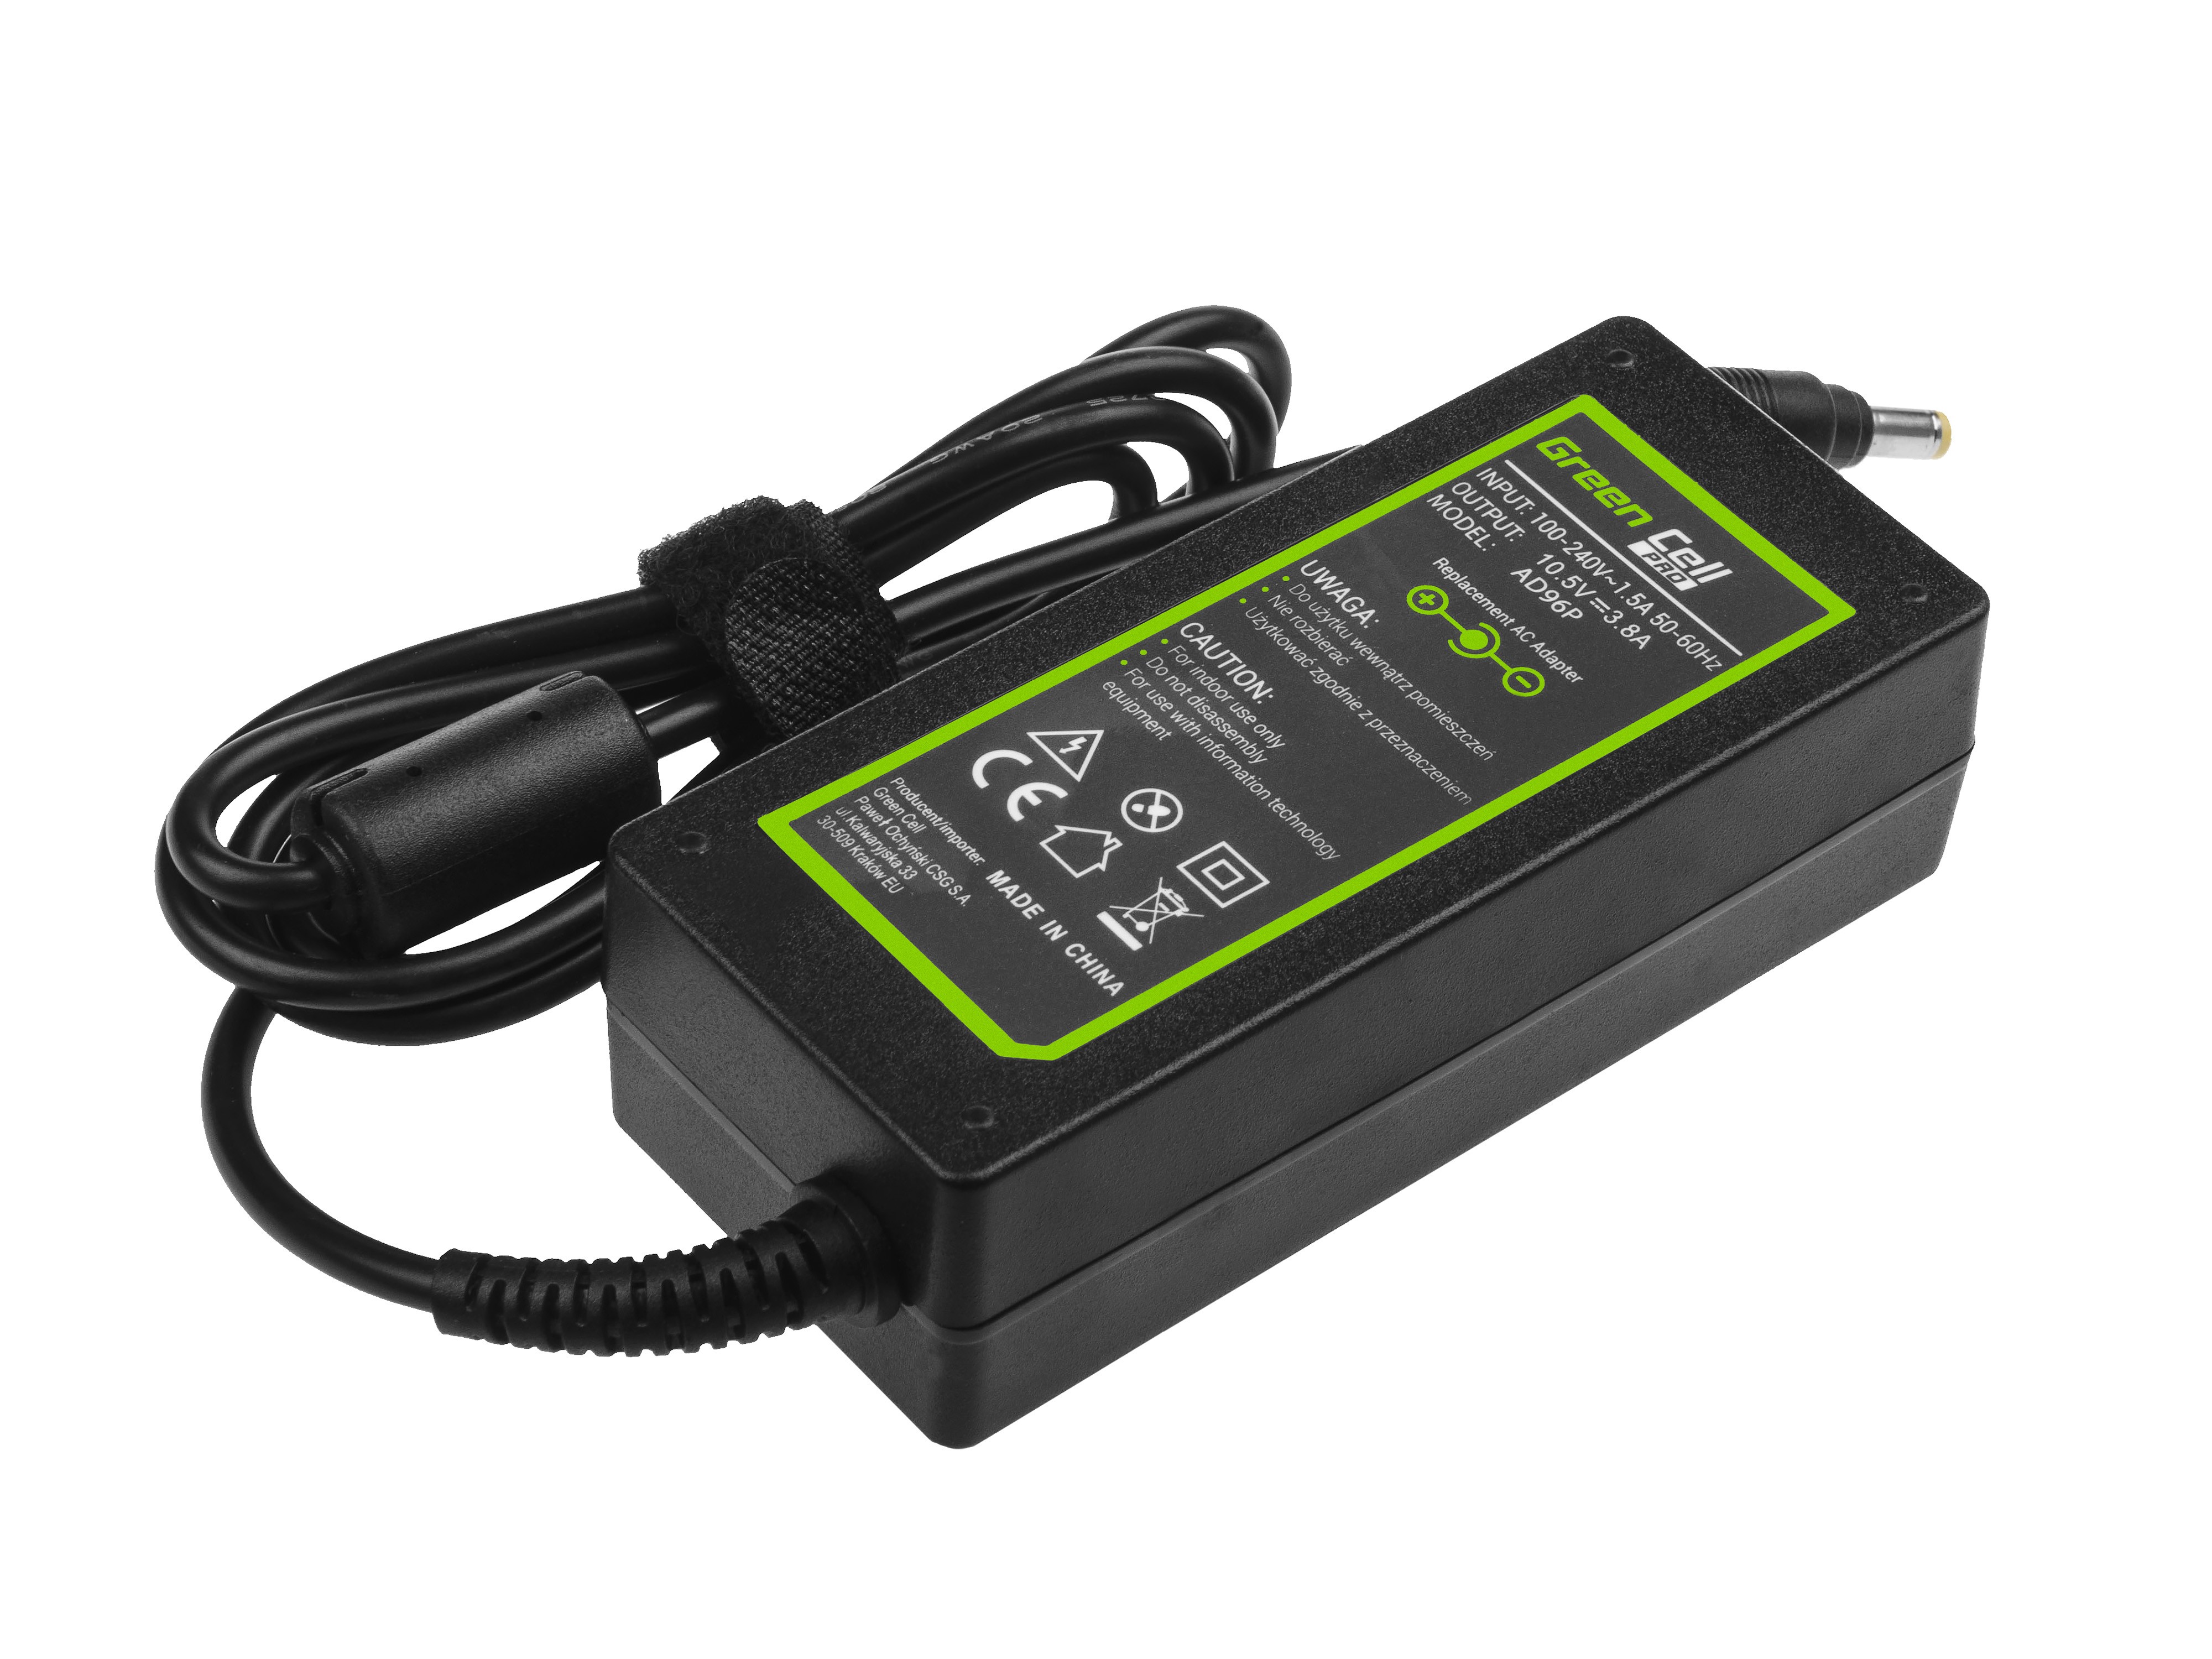 PRO Oplader  AC Adapter voor Sony Vaio S13 SVS13 Pro 11 13 Duo 11 13 10.5V 3.8A 40W